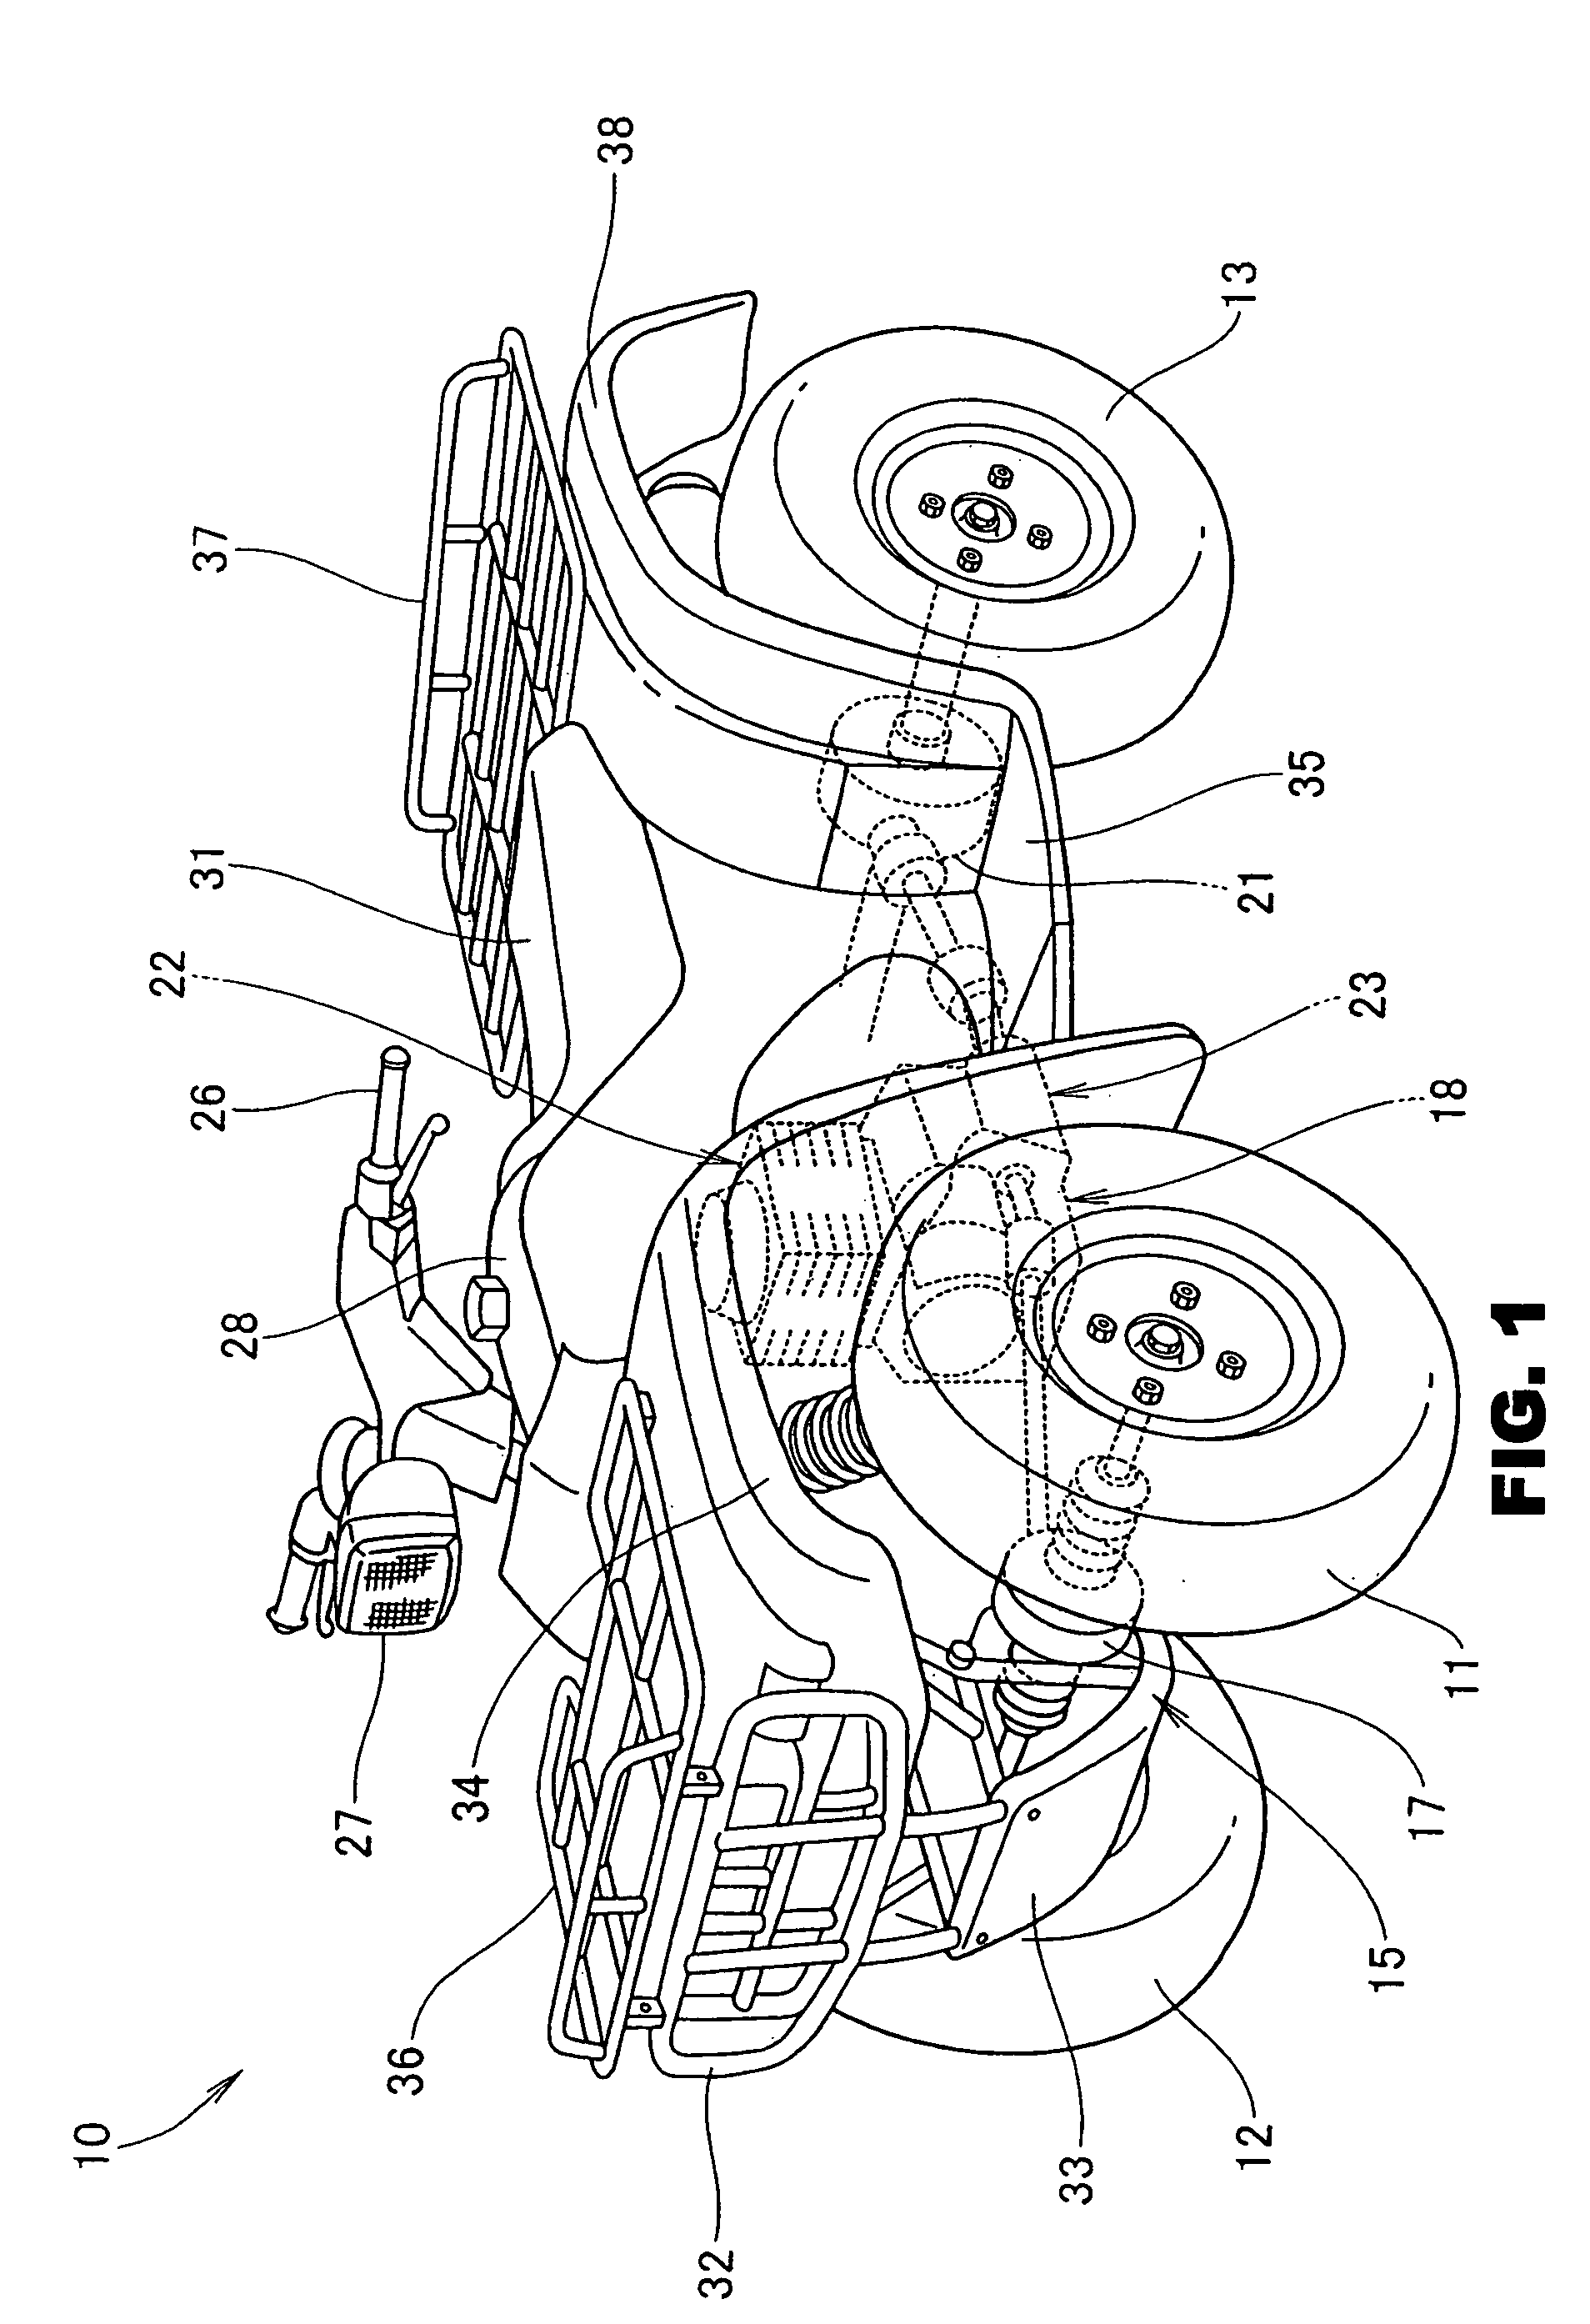 Vehicle body frame structure for all-terrain vehicle